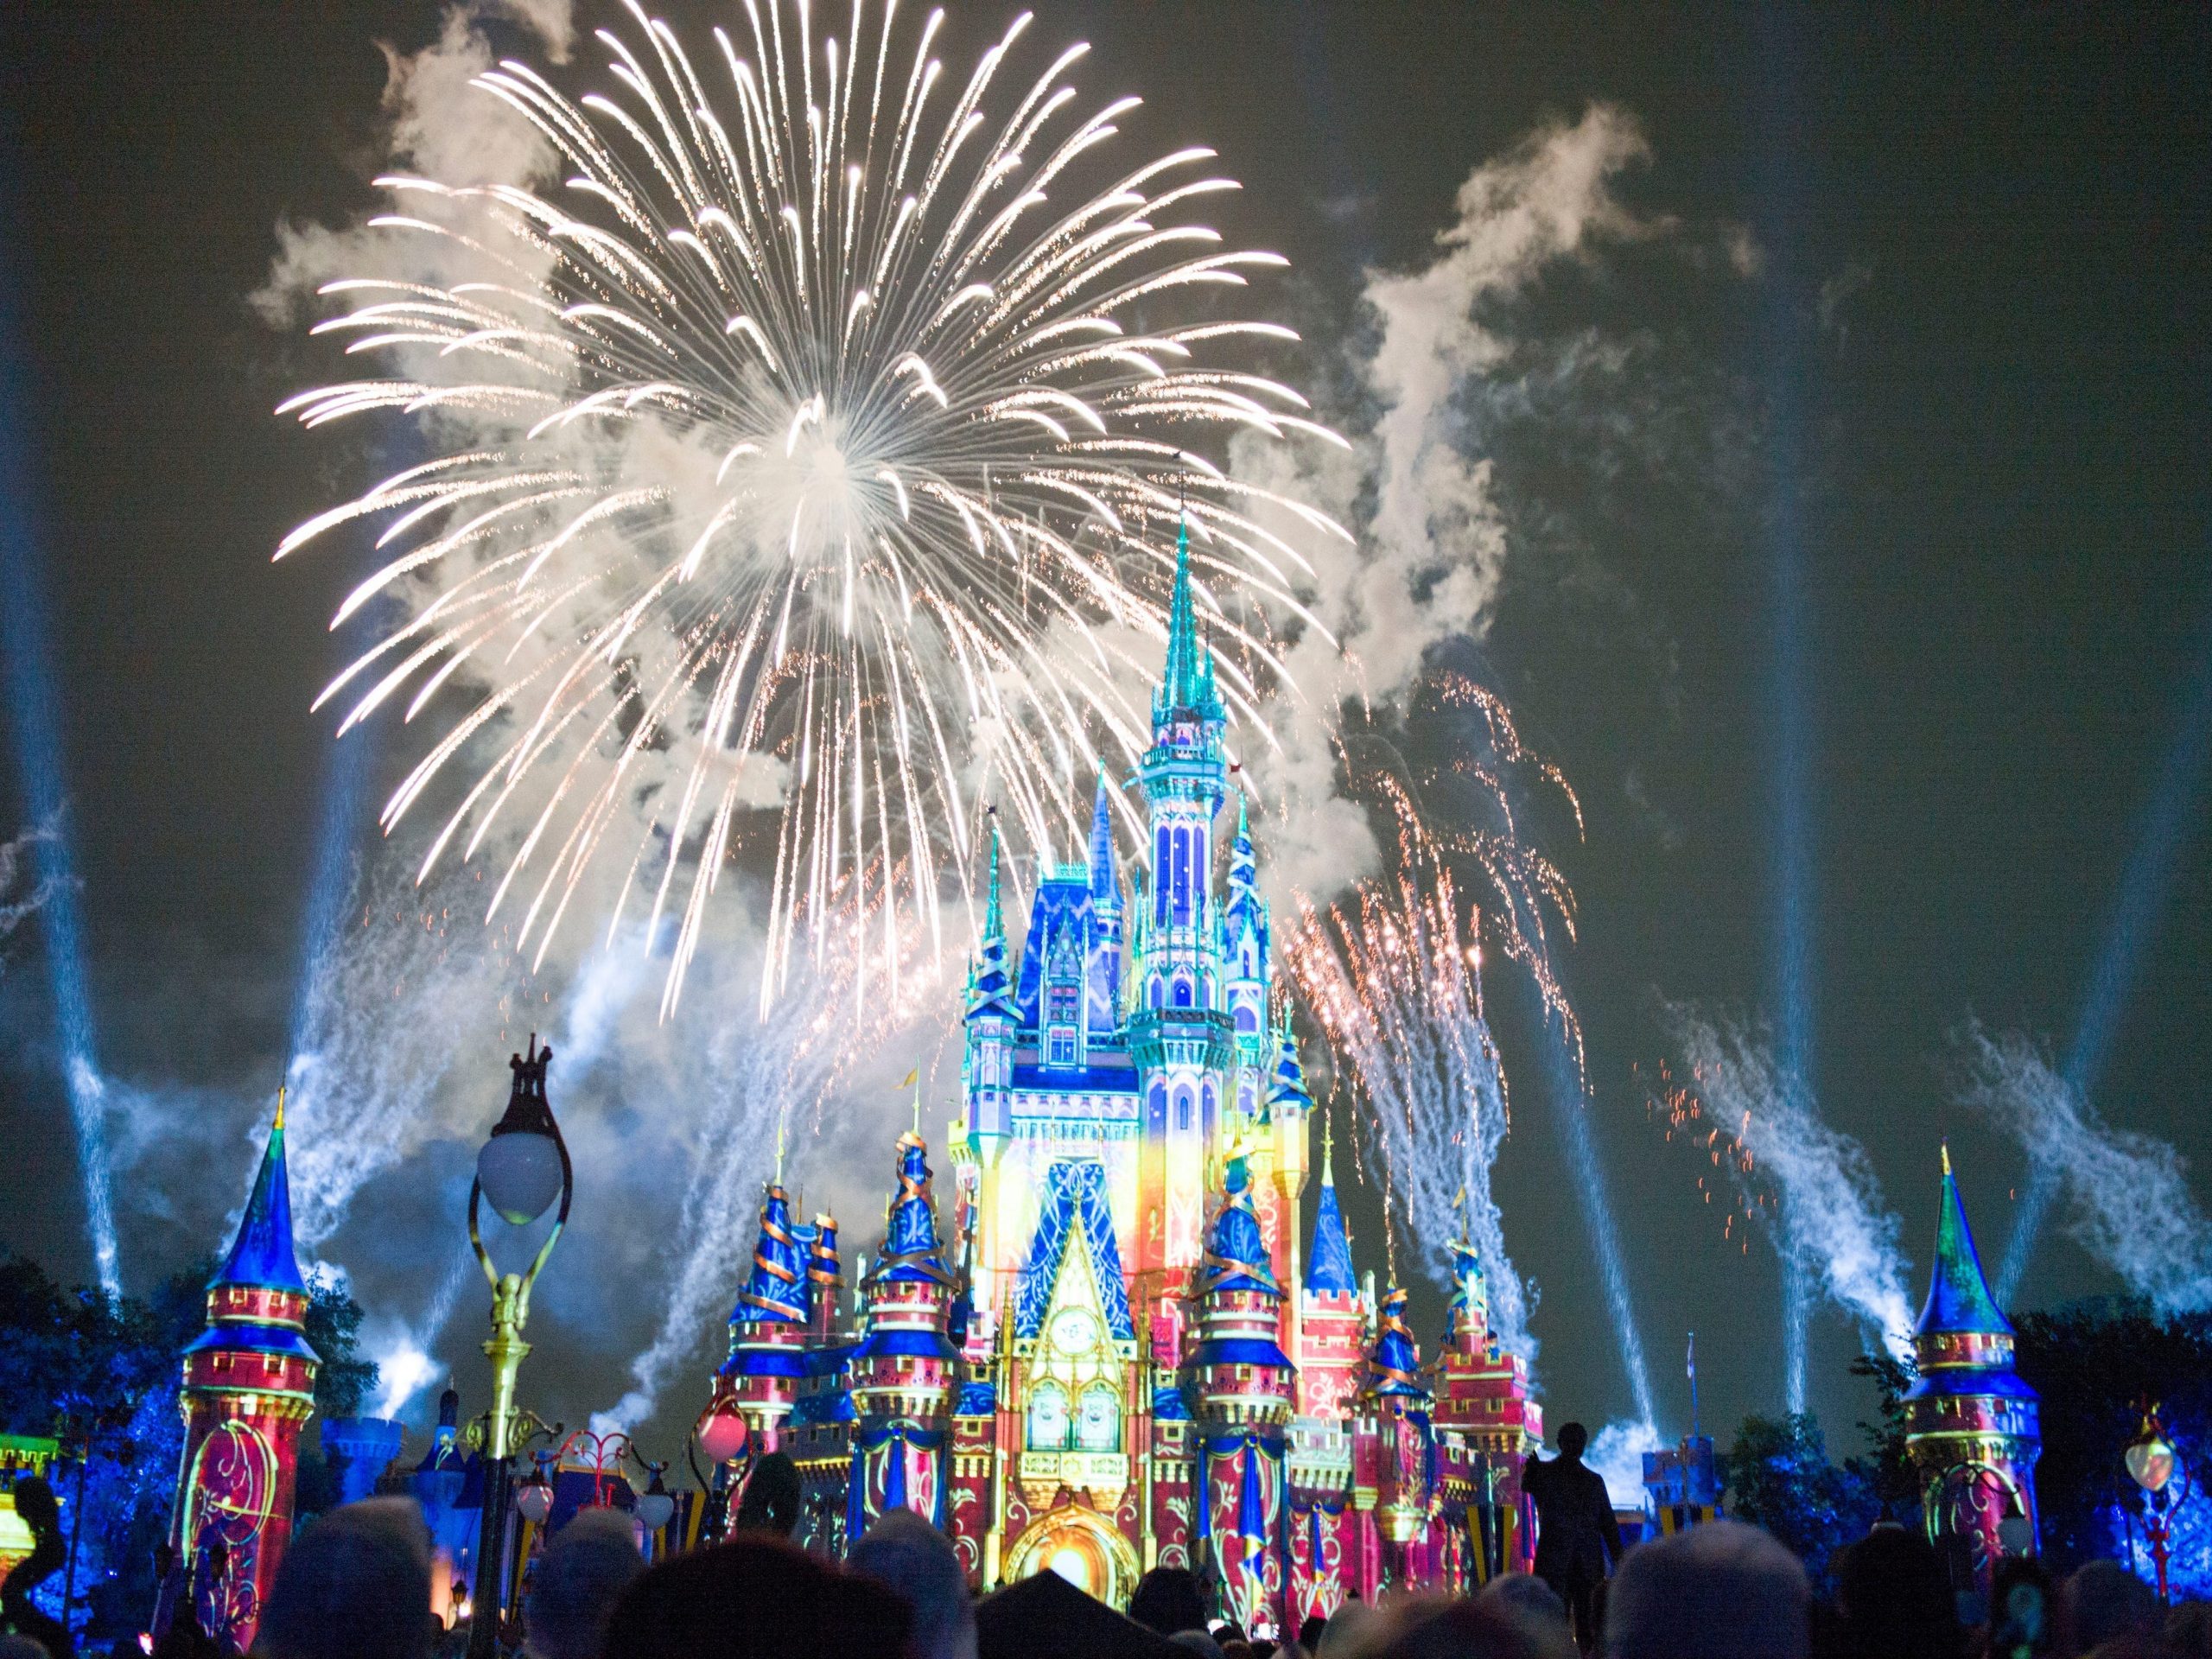 ourists leave after a stunning firework show at the Magic Kingdom Park in Walt Disney World Resort on July 1, 2021 in Lake Buena Vista, Florida.